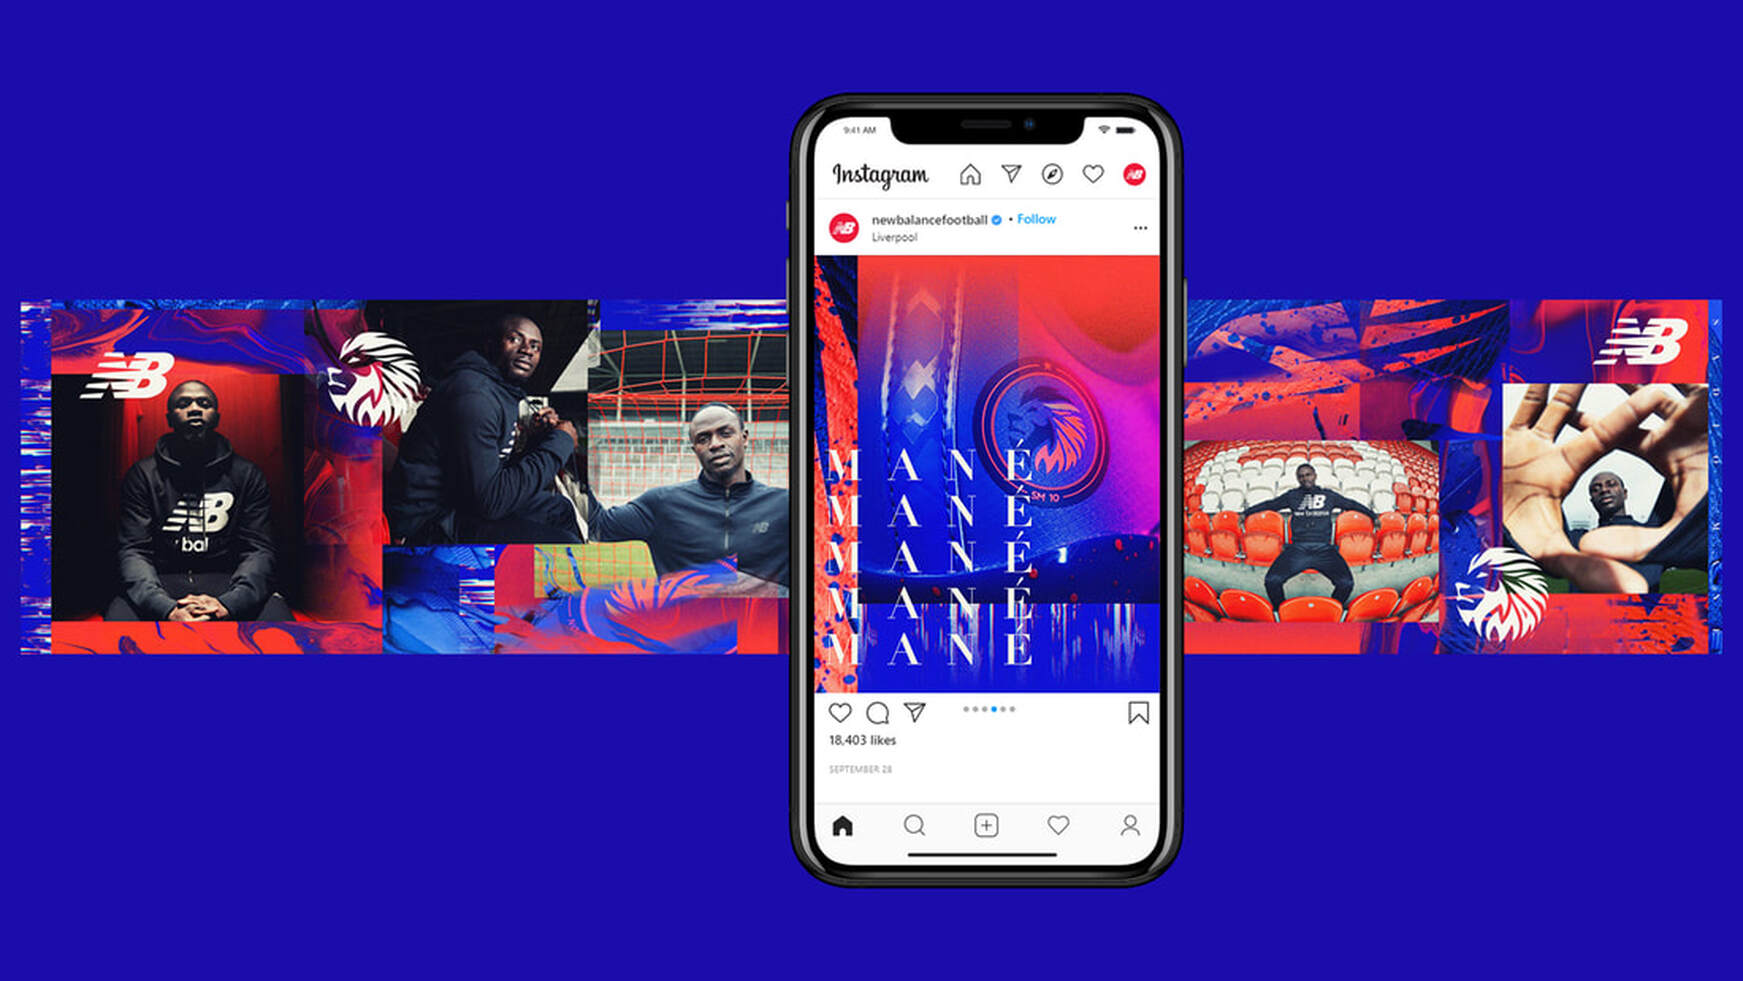 new balance artwork featuring mane mocked up onto an iphone